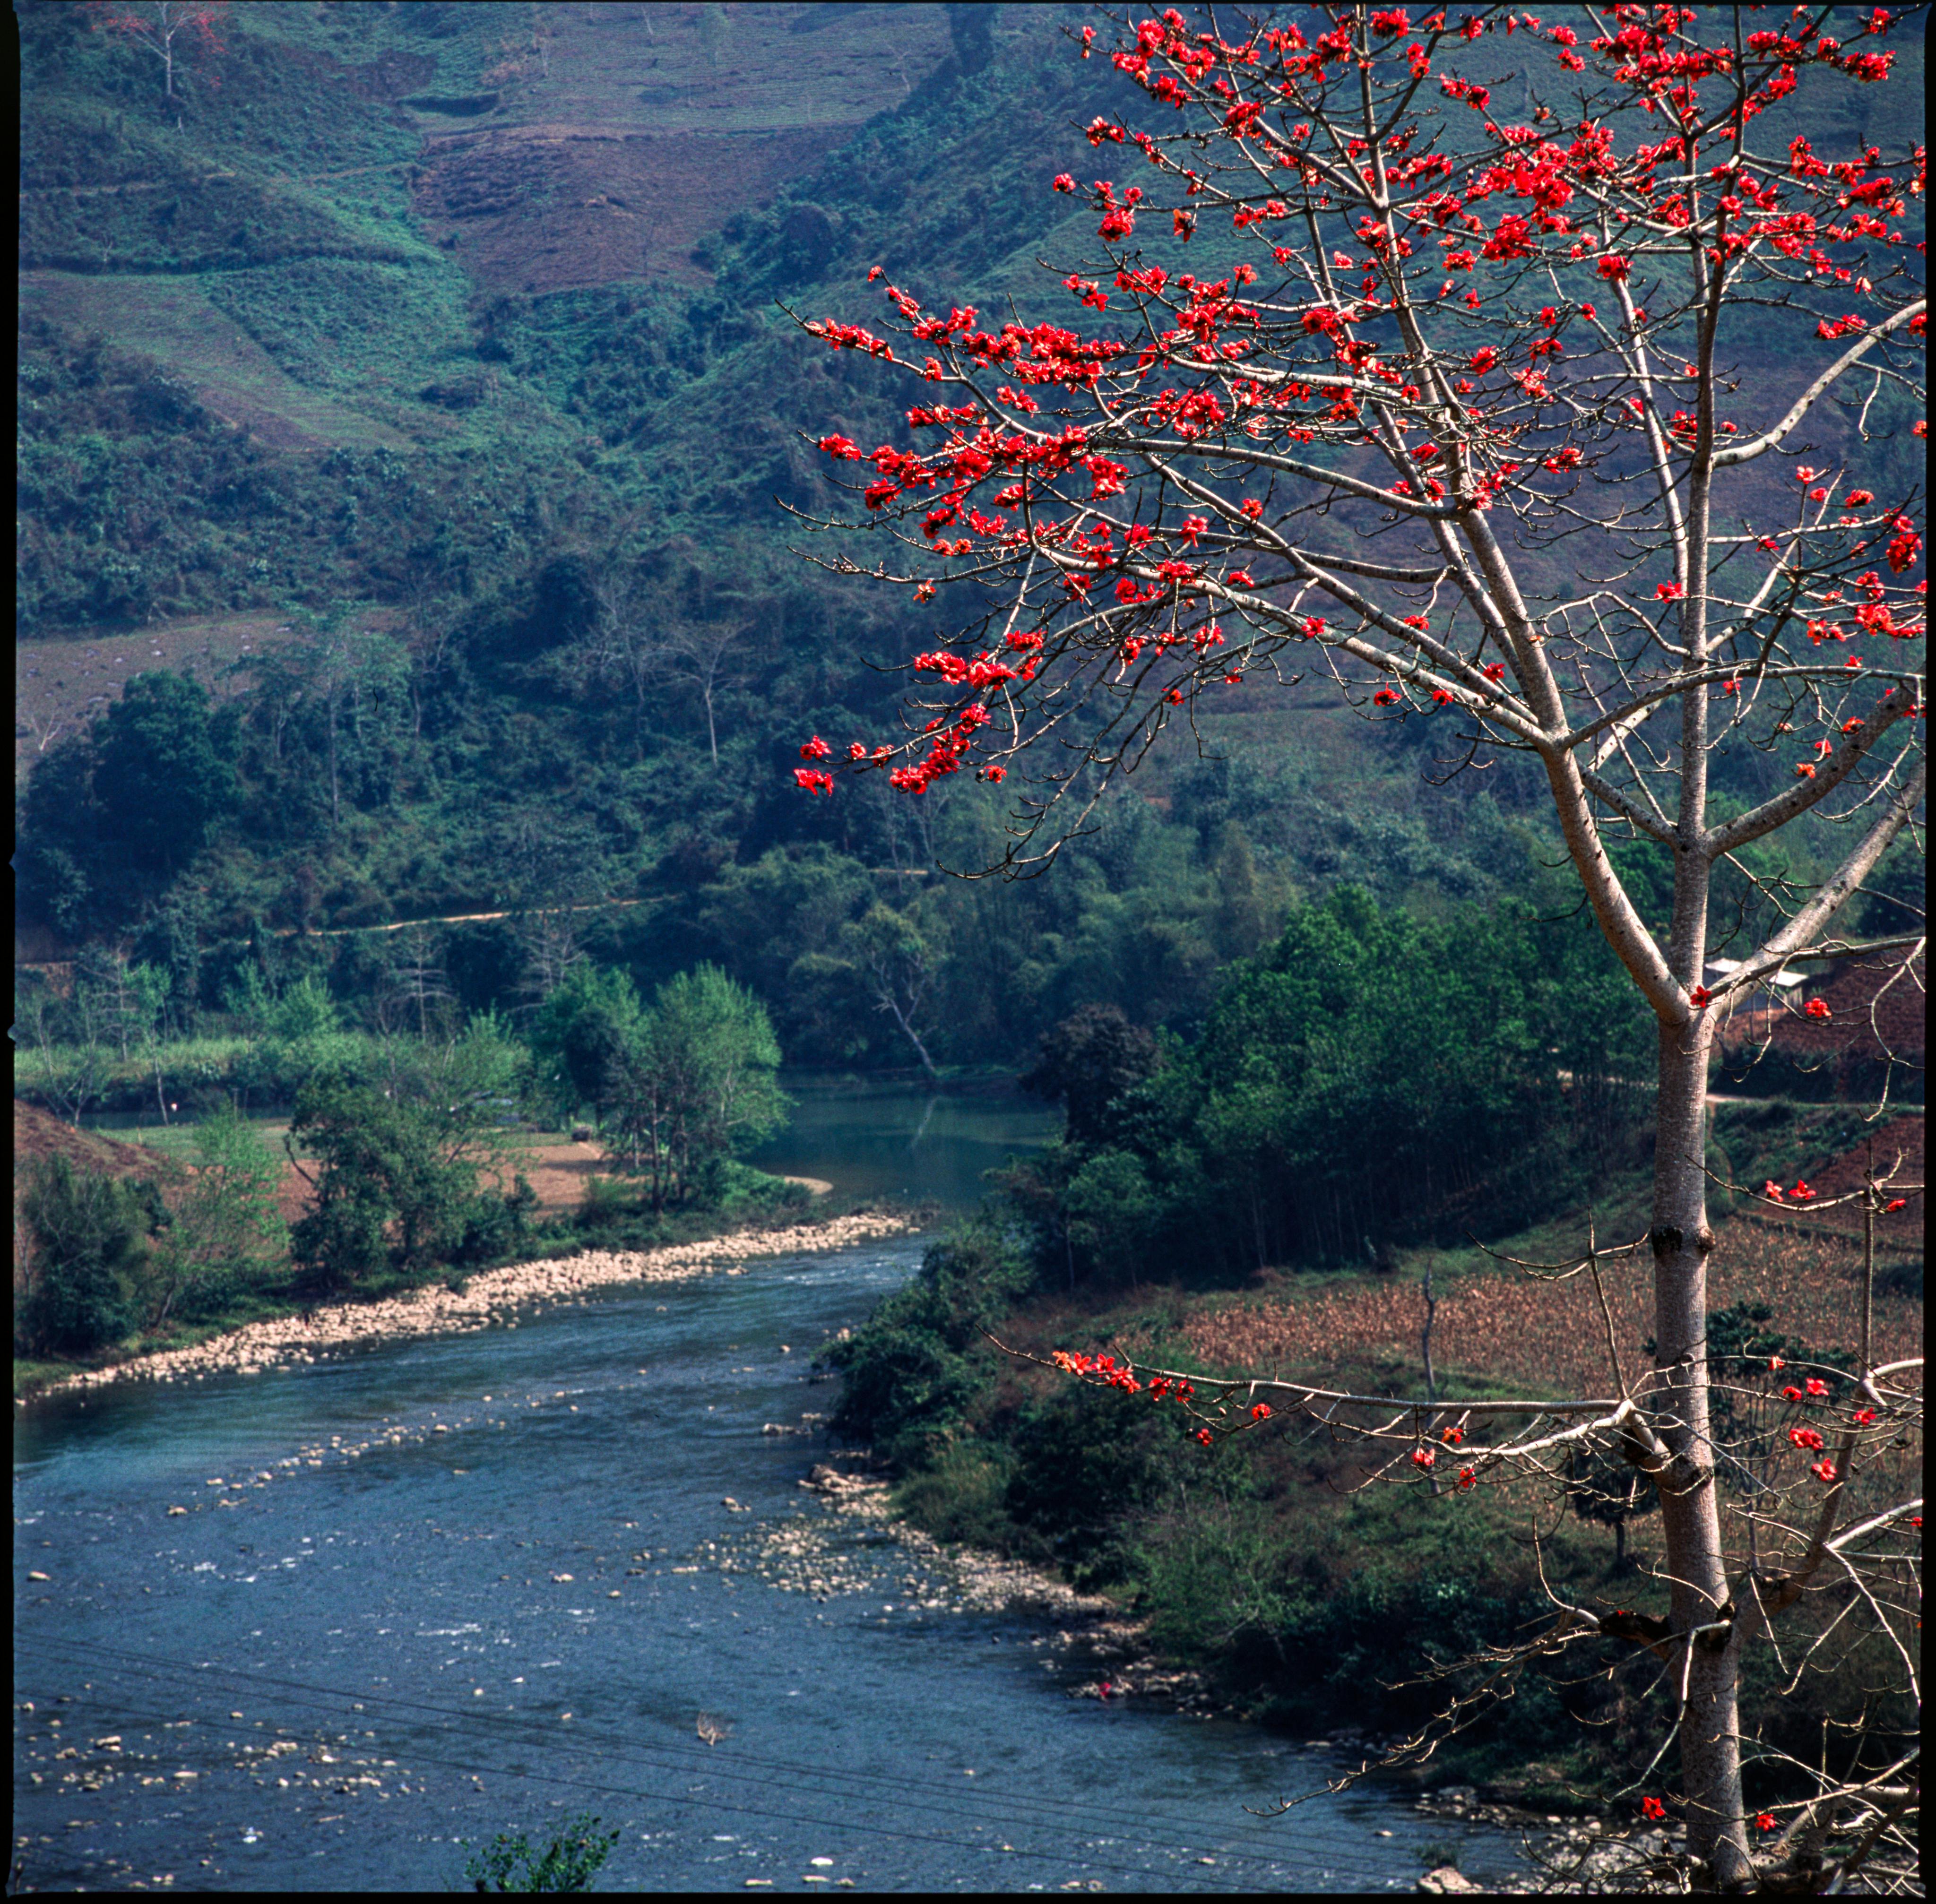 free-photo-of-a-tree-with-red-flowers-growing-on-it-next-to-a-river.jpeg